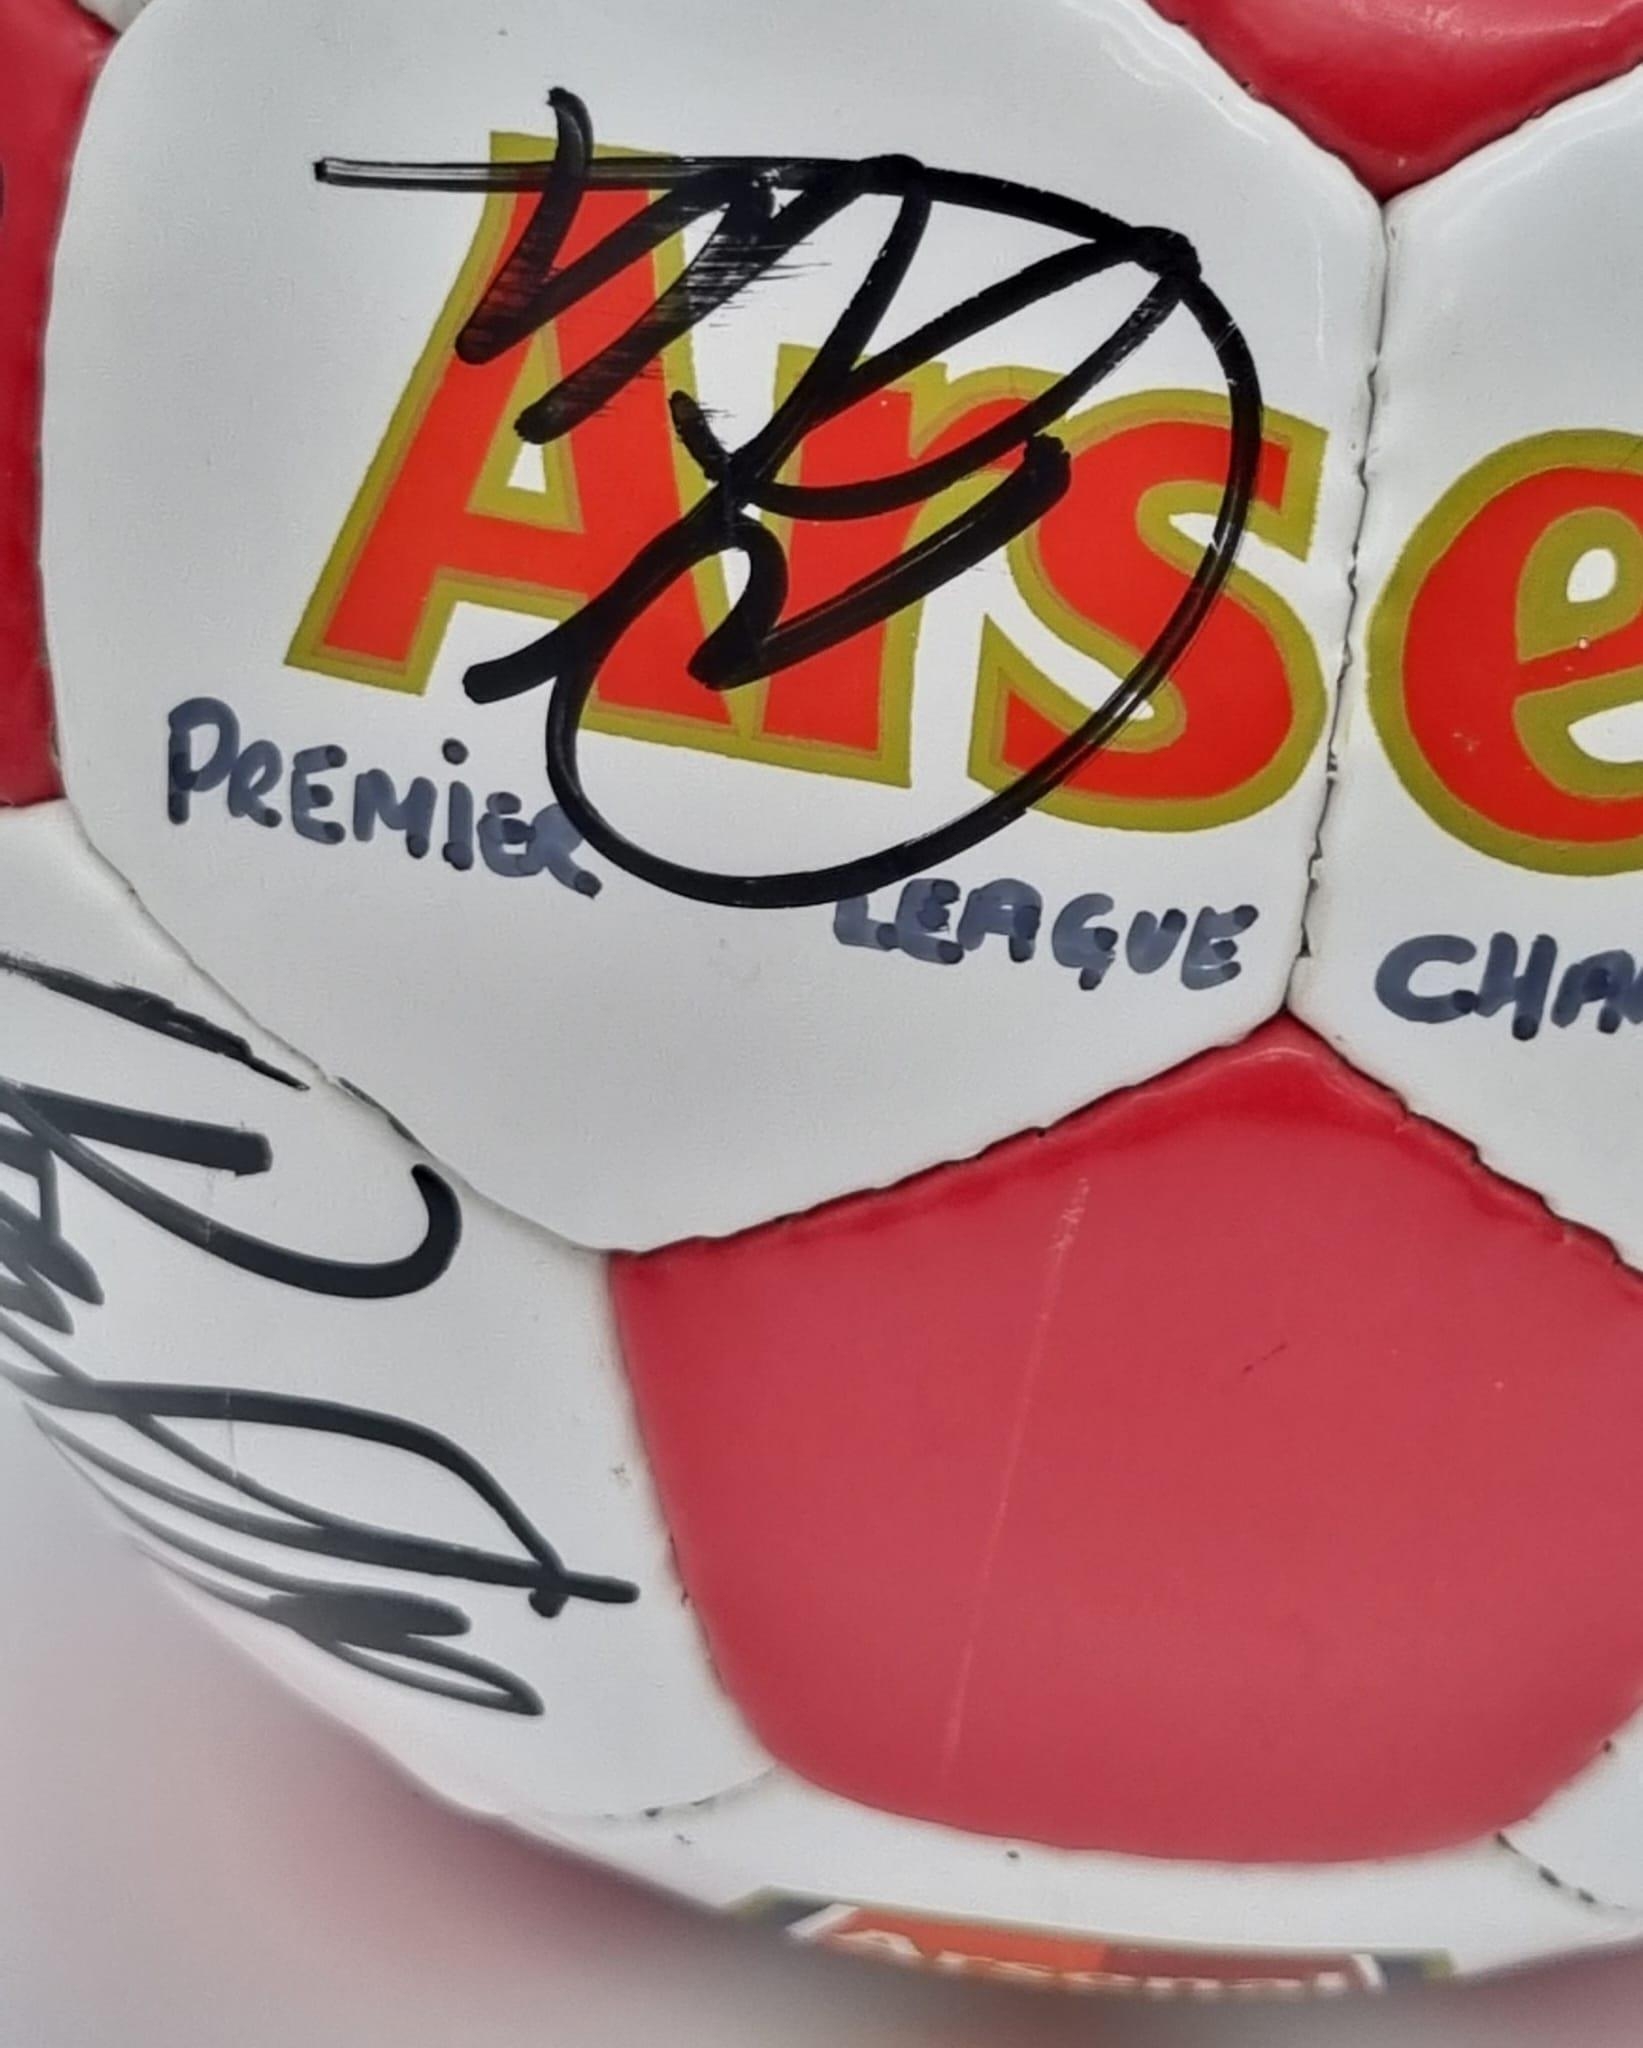 An Incredible Authentic Arsenal FC Invincibles Signed Premier League Winners Football - 2003/4 - Image 5 of 19